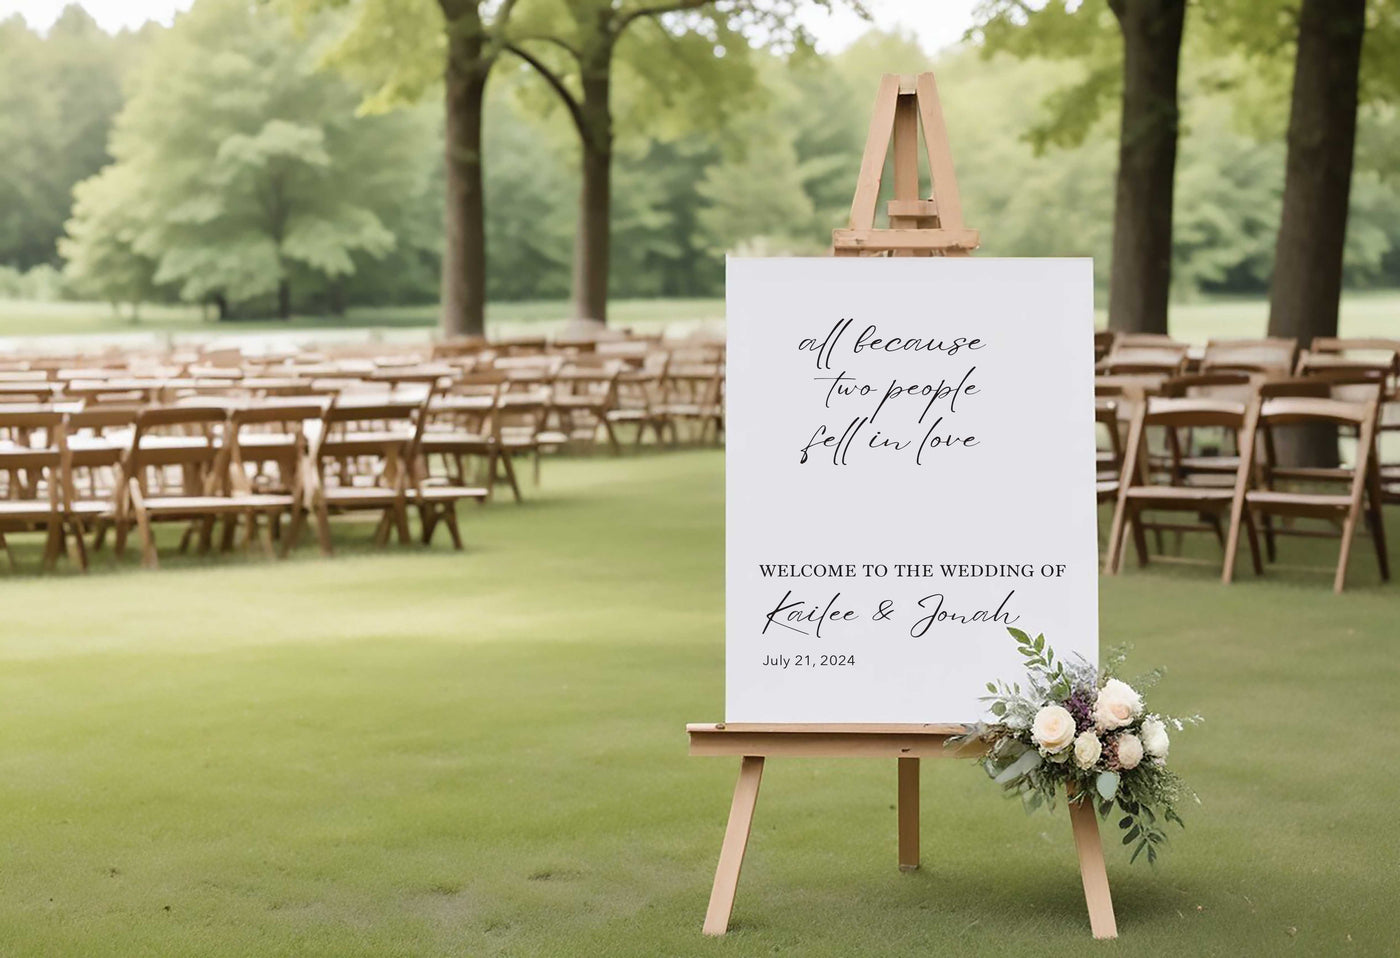 All because two people fell in love Wedding Sign